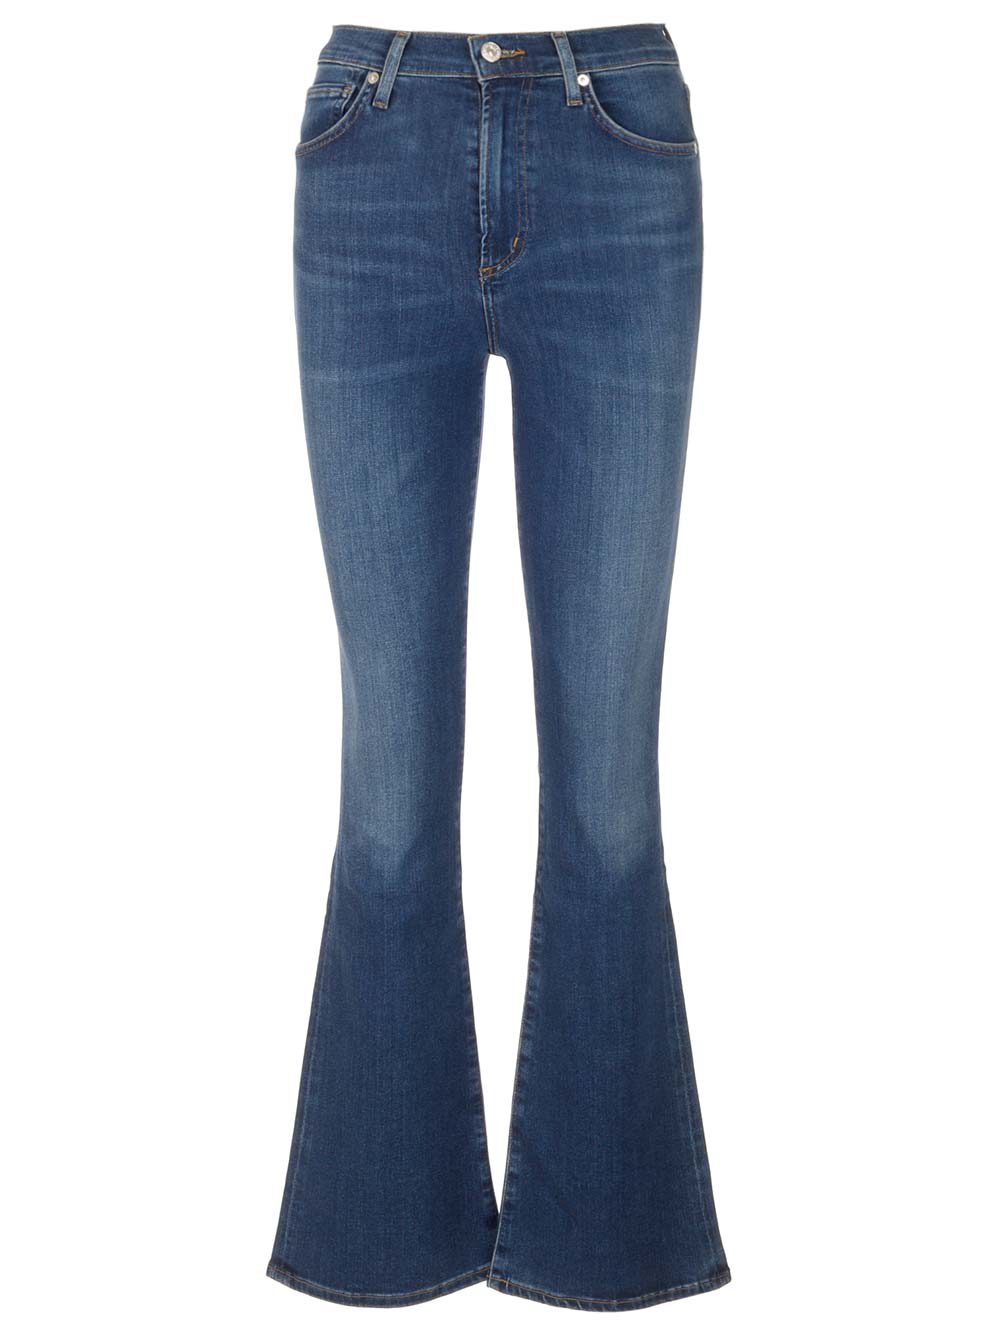 CITIZENS OF HUMANITY LILAH BOOTCUT JEANS